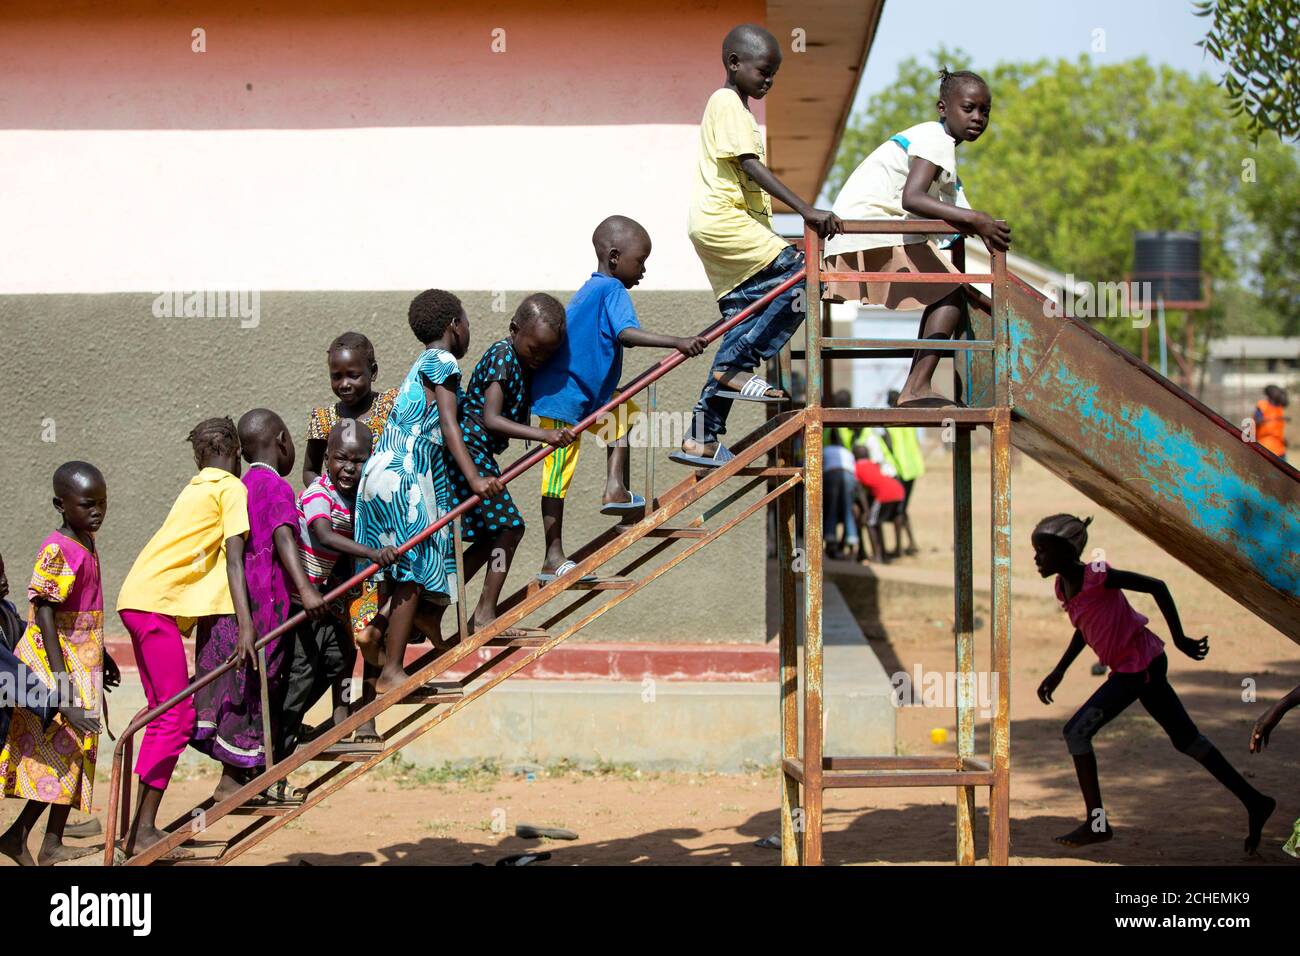 ONE USE ONLY NO ARCHIVE EDITORIAL USE ONLY A group of children queueing up for a ride on a slide at a child friendly space in Juba in the South Sudan appear in this image, which goes on display at a photography exhibition from international children???s charity World Vision that goes on display from Friday 12th until Sunday 14th April at The Old Truman Brewery in Brick Lane, London. Stock Photo